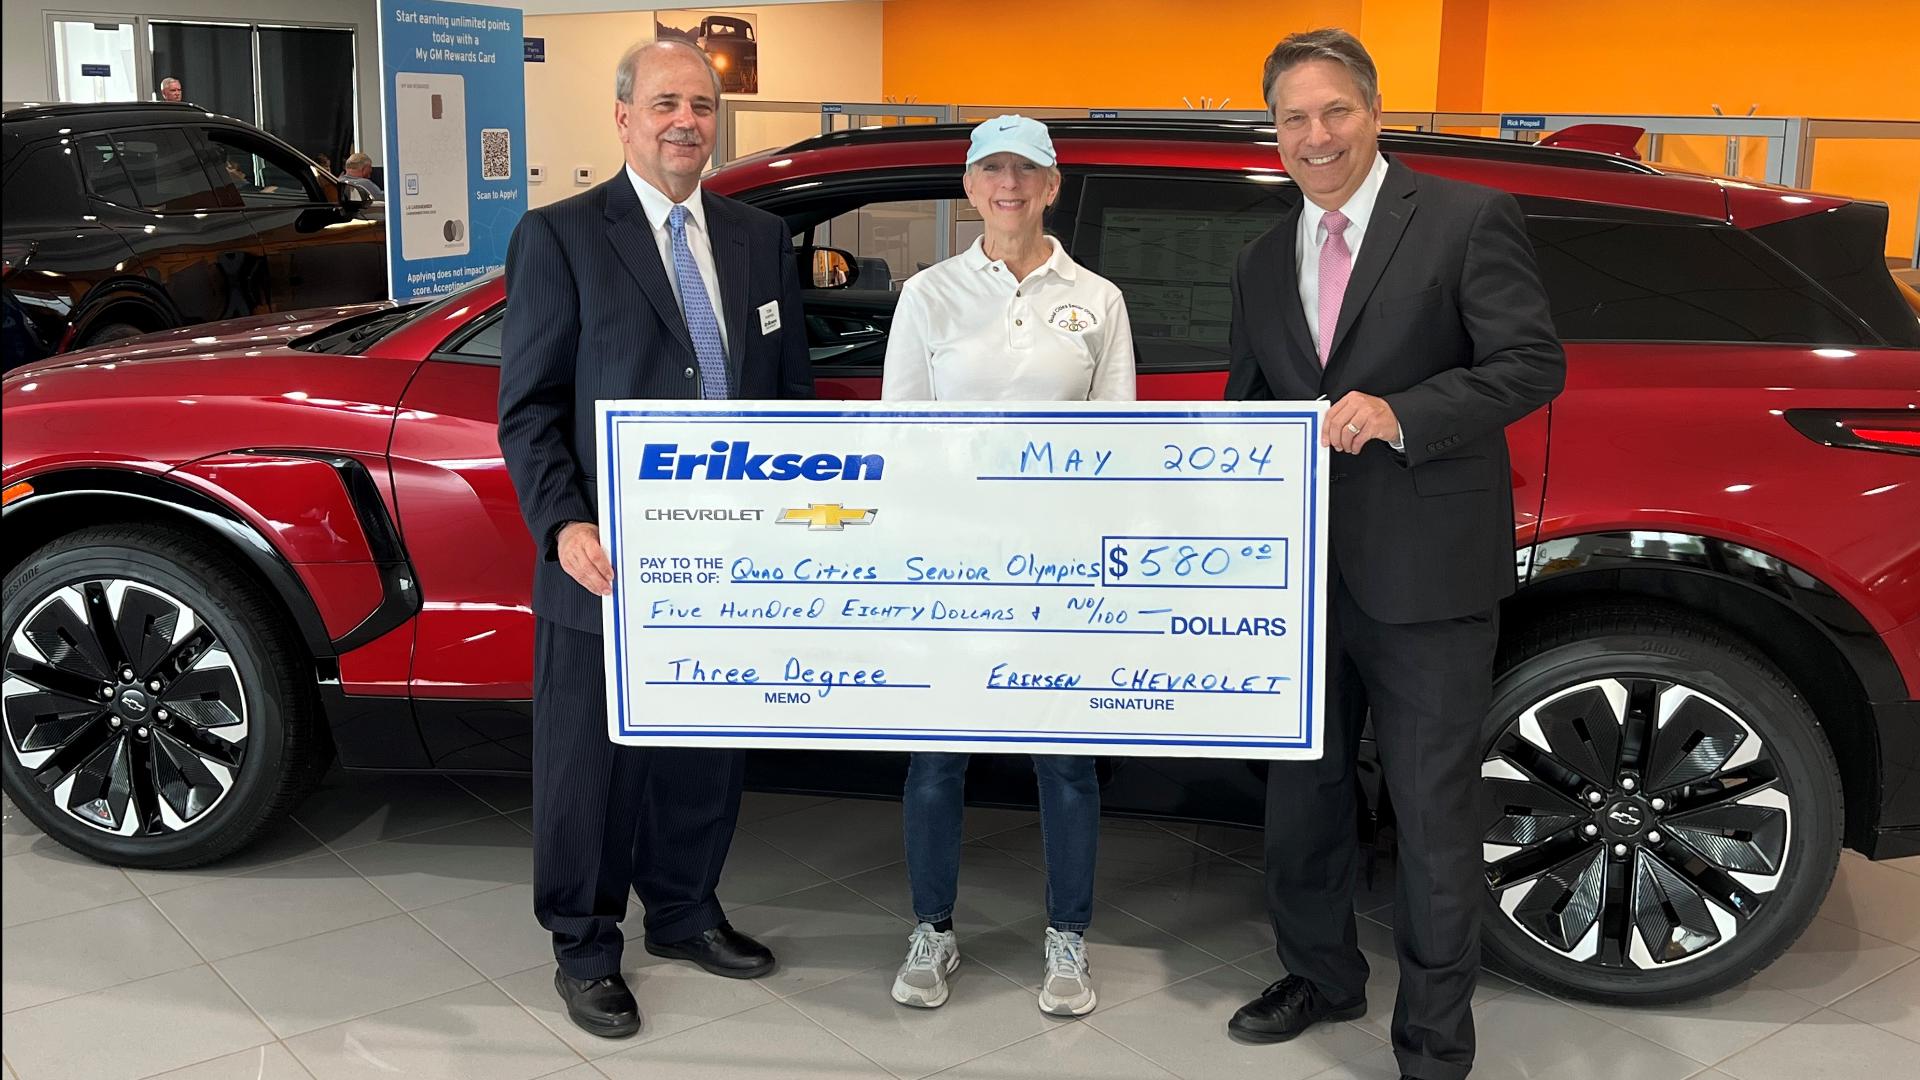 The Quad Cities Senior Olympics received $580 from Eriksen Chevrolet as the recipient of the May 2024 Three Degree Guarantee.